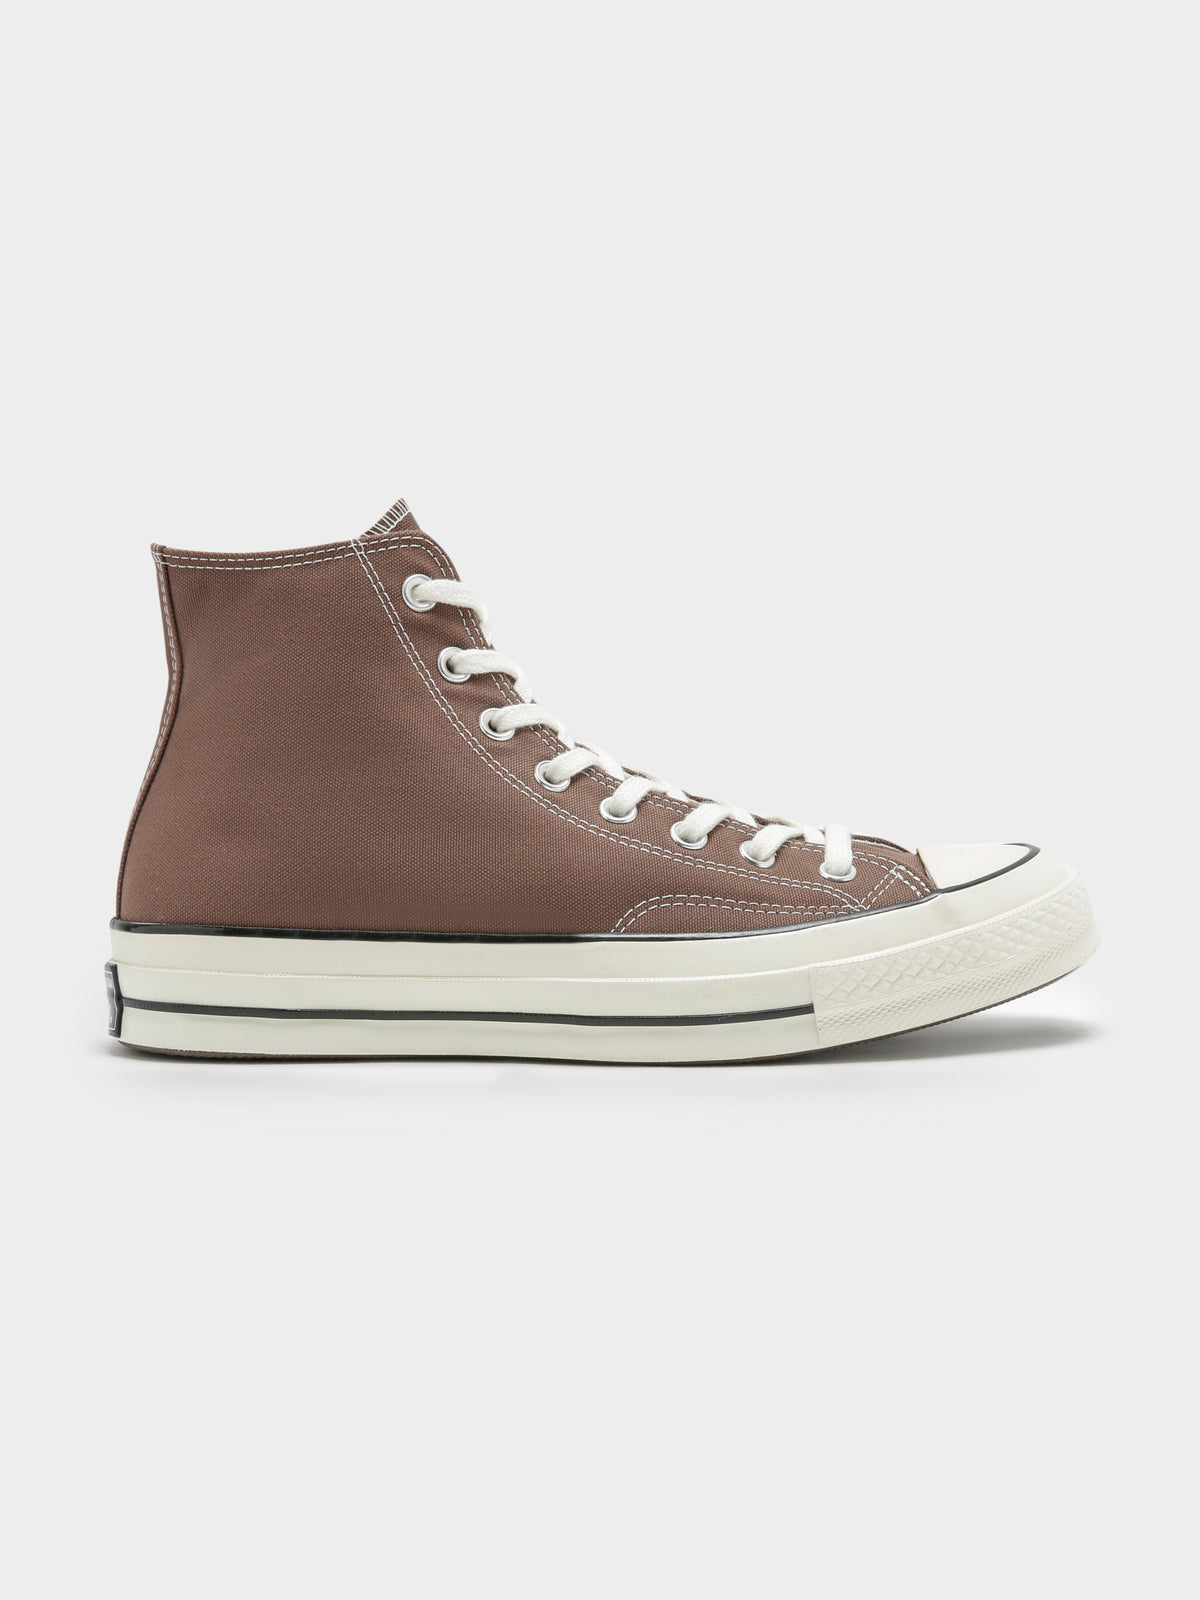 Unisex Chuck 70 High Sneakers in Squirrel Friend